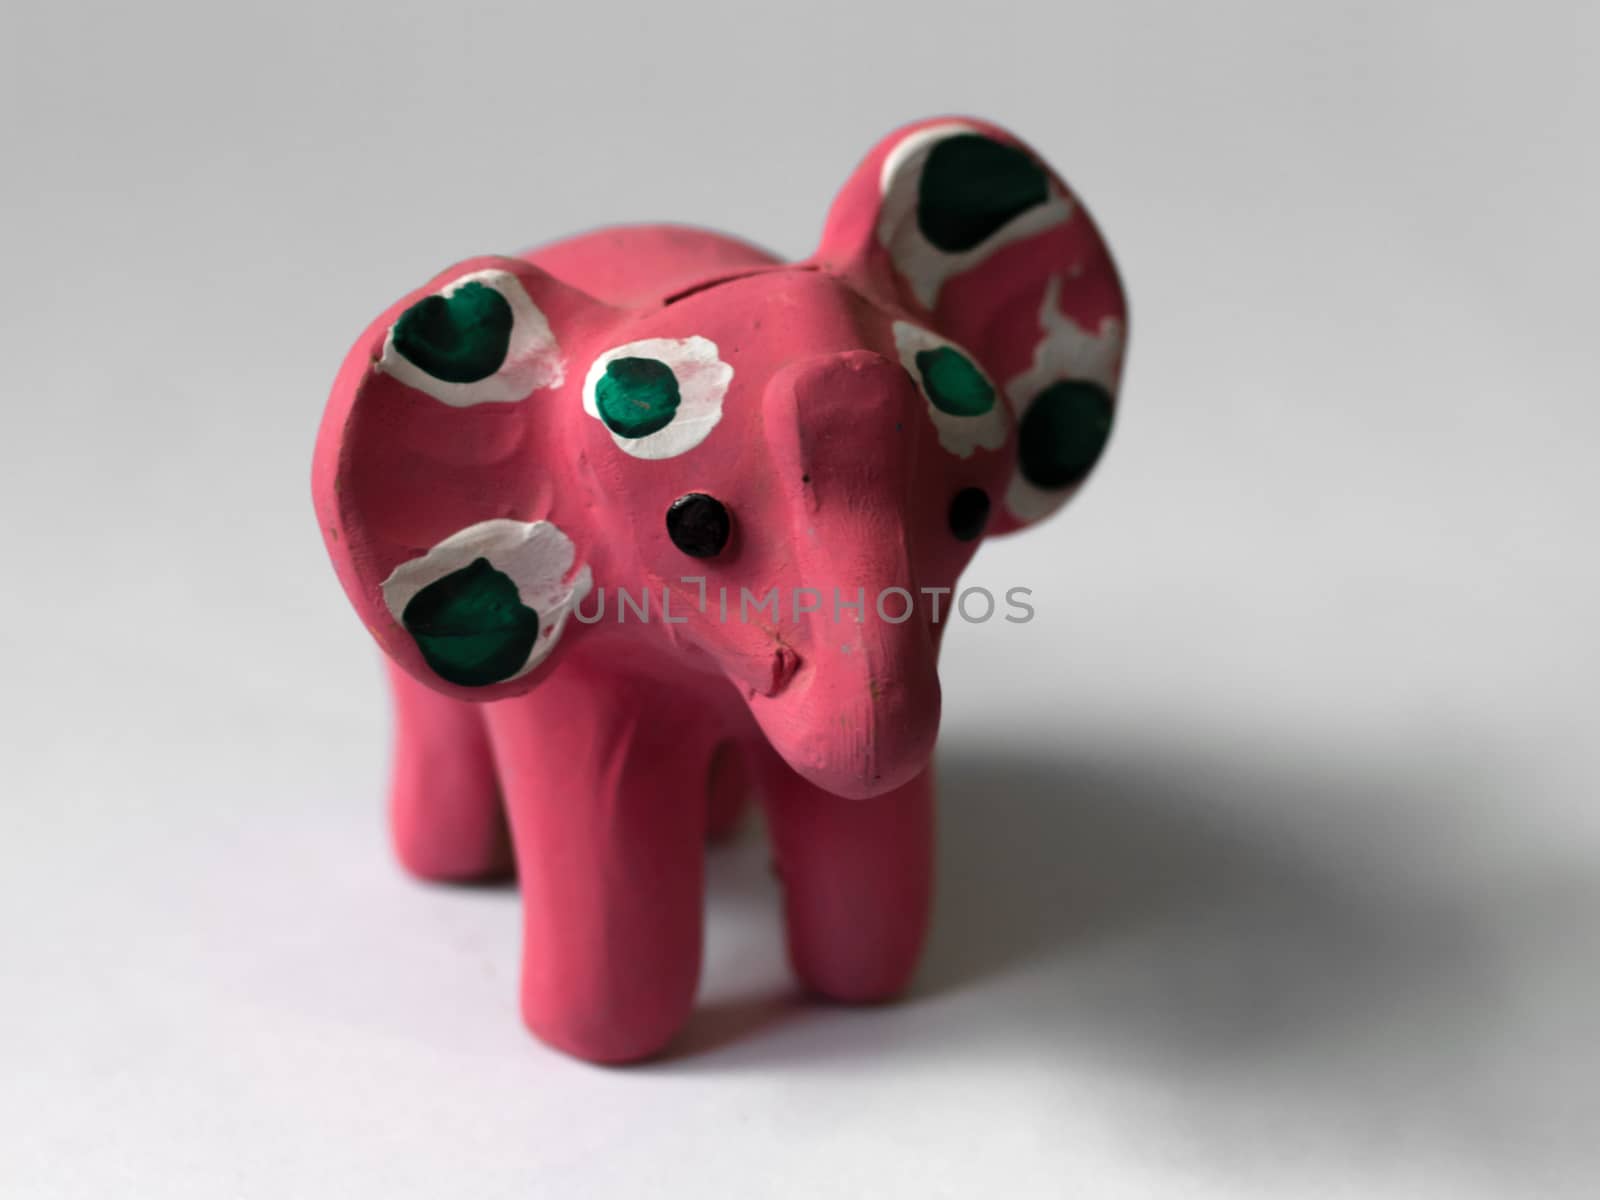 COLOR PHOTO OF PINK ELEPHANT TOY